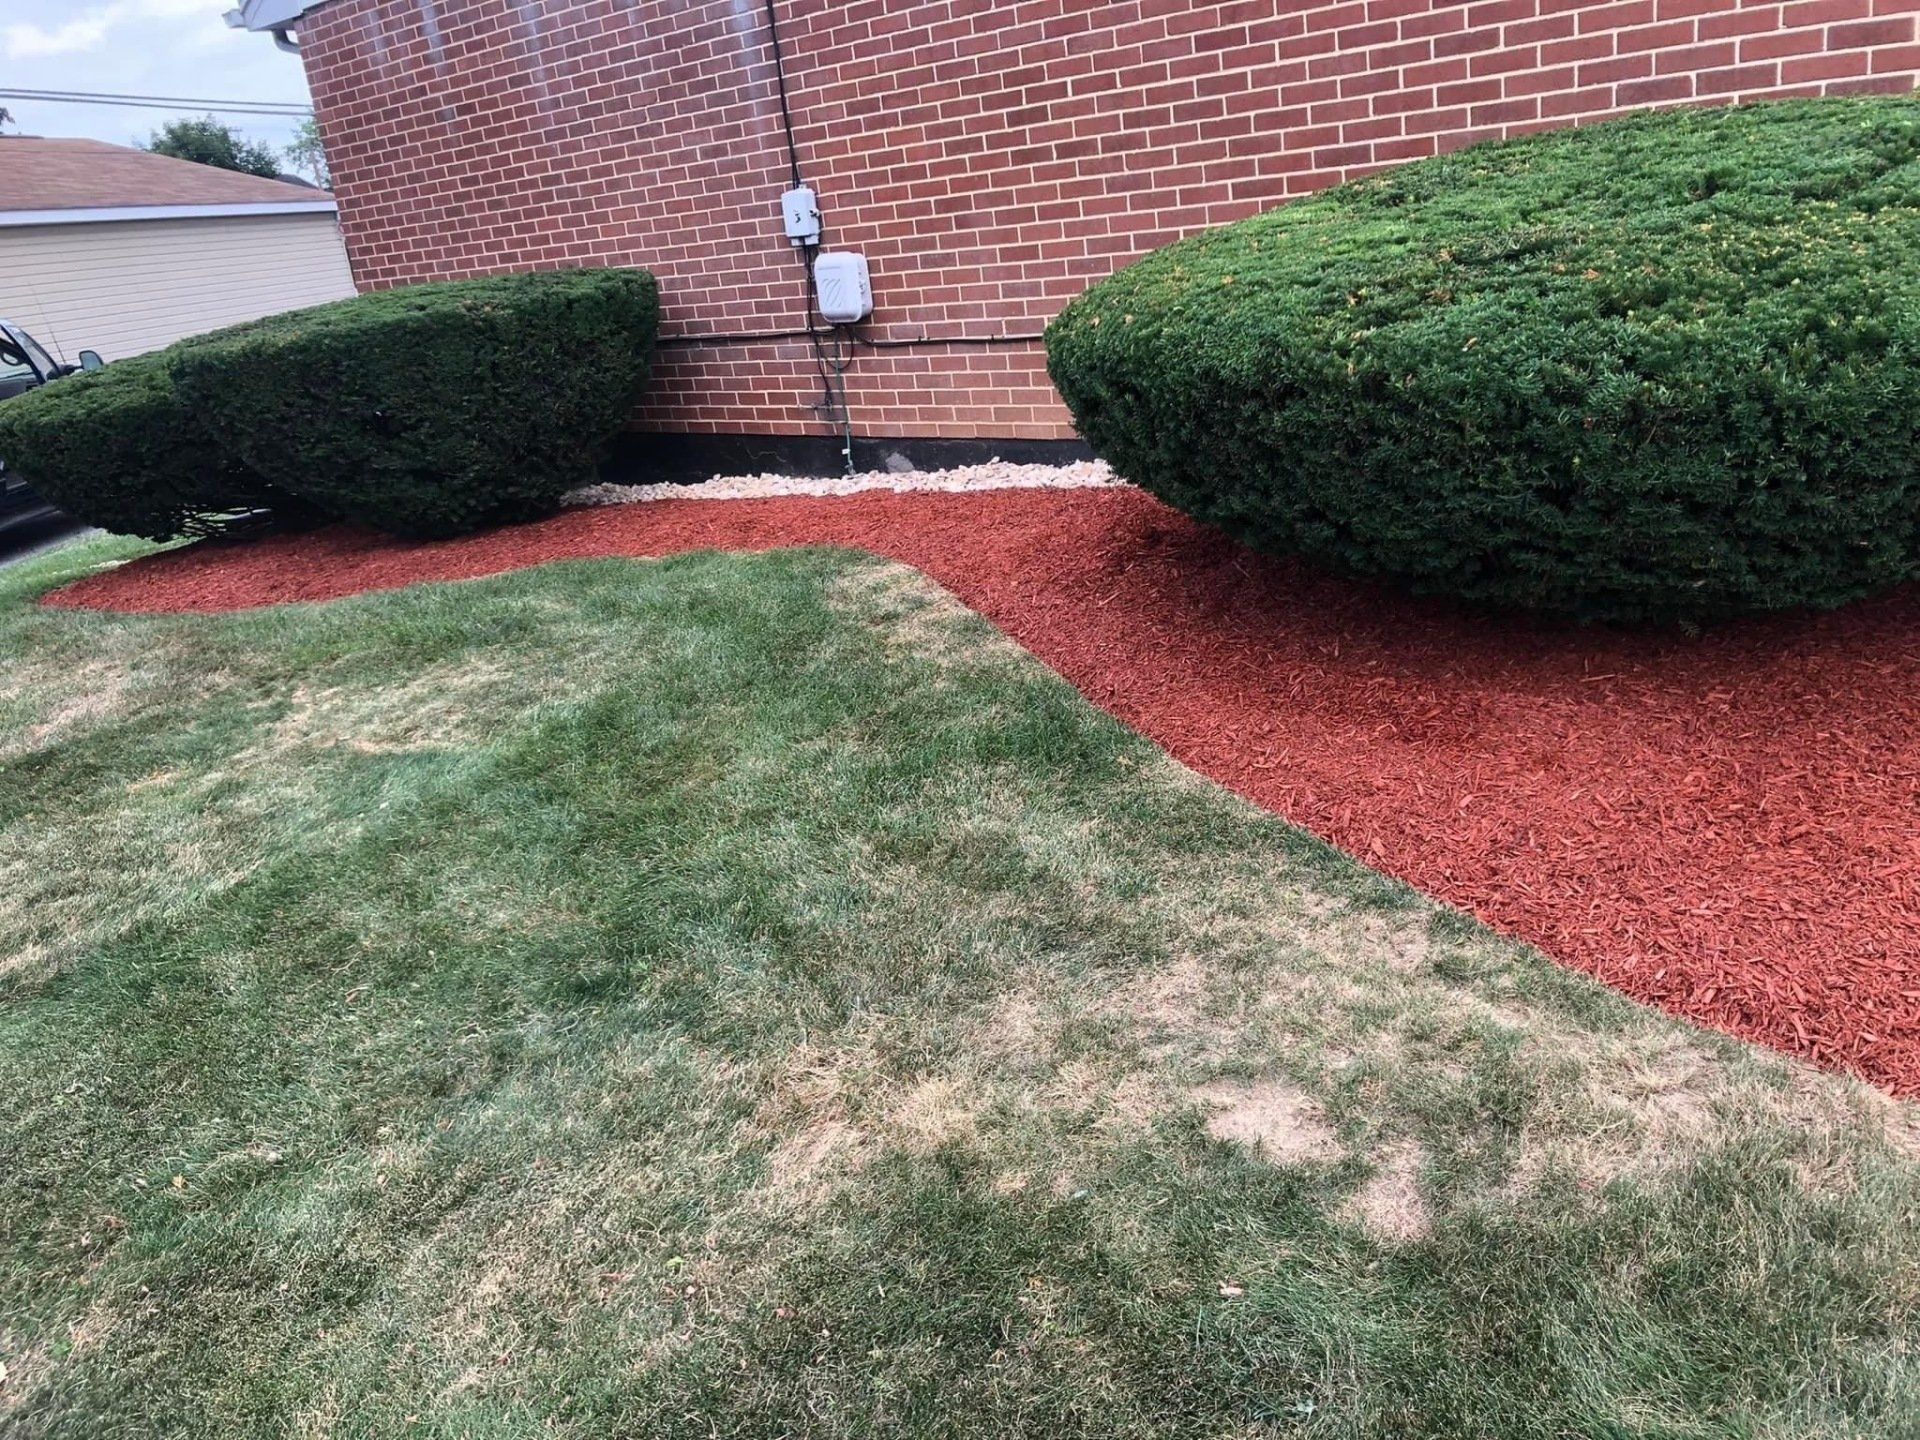 Perfectly laid red mulch under the shrubs